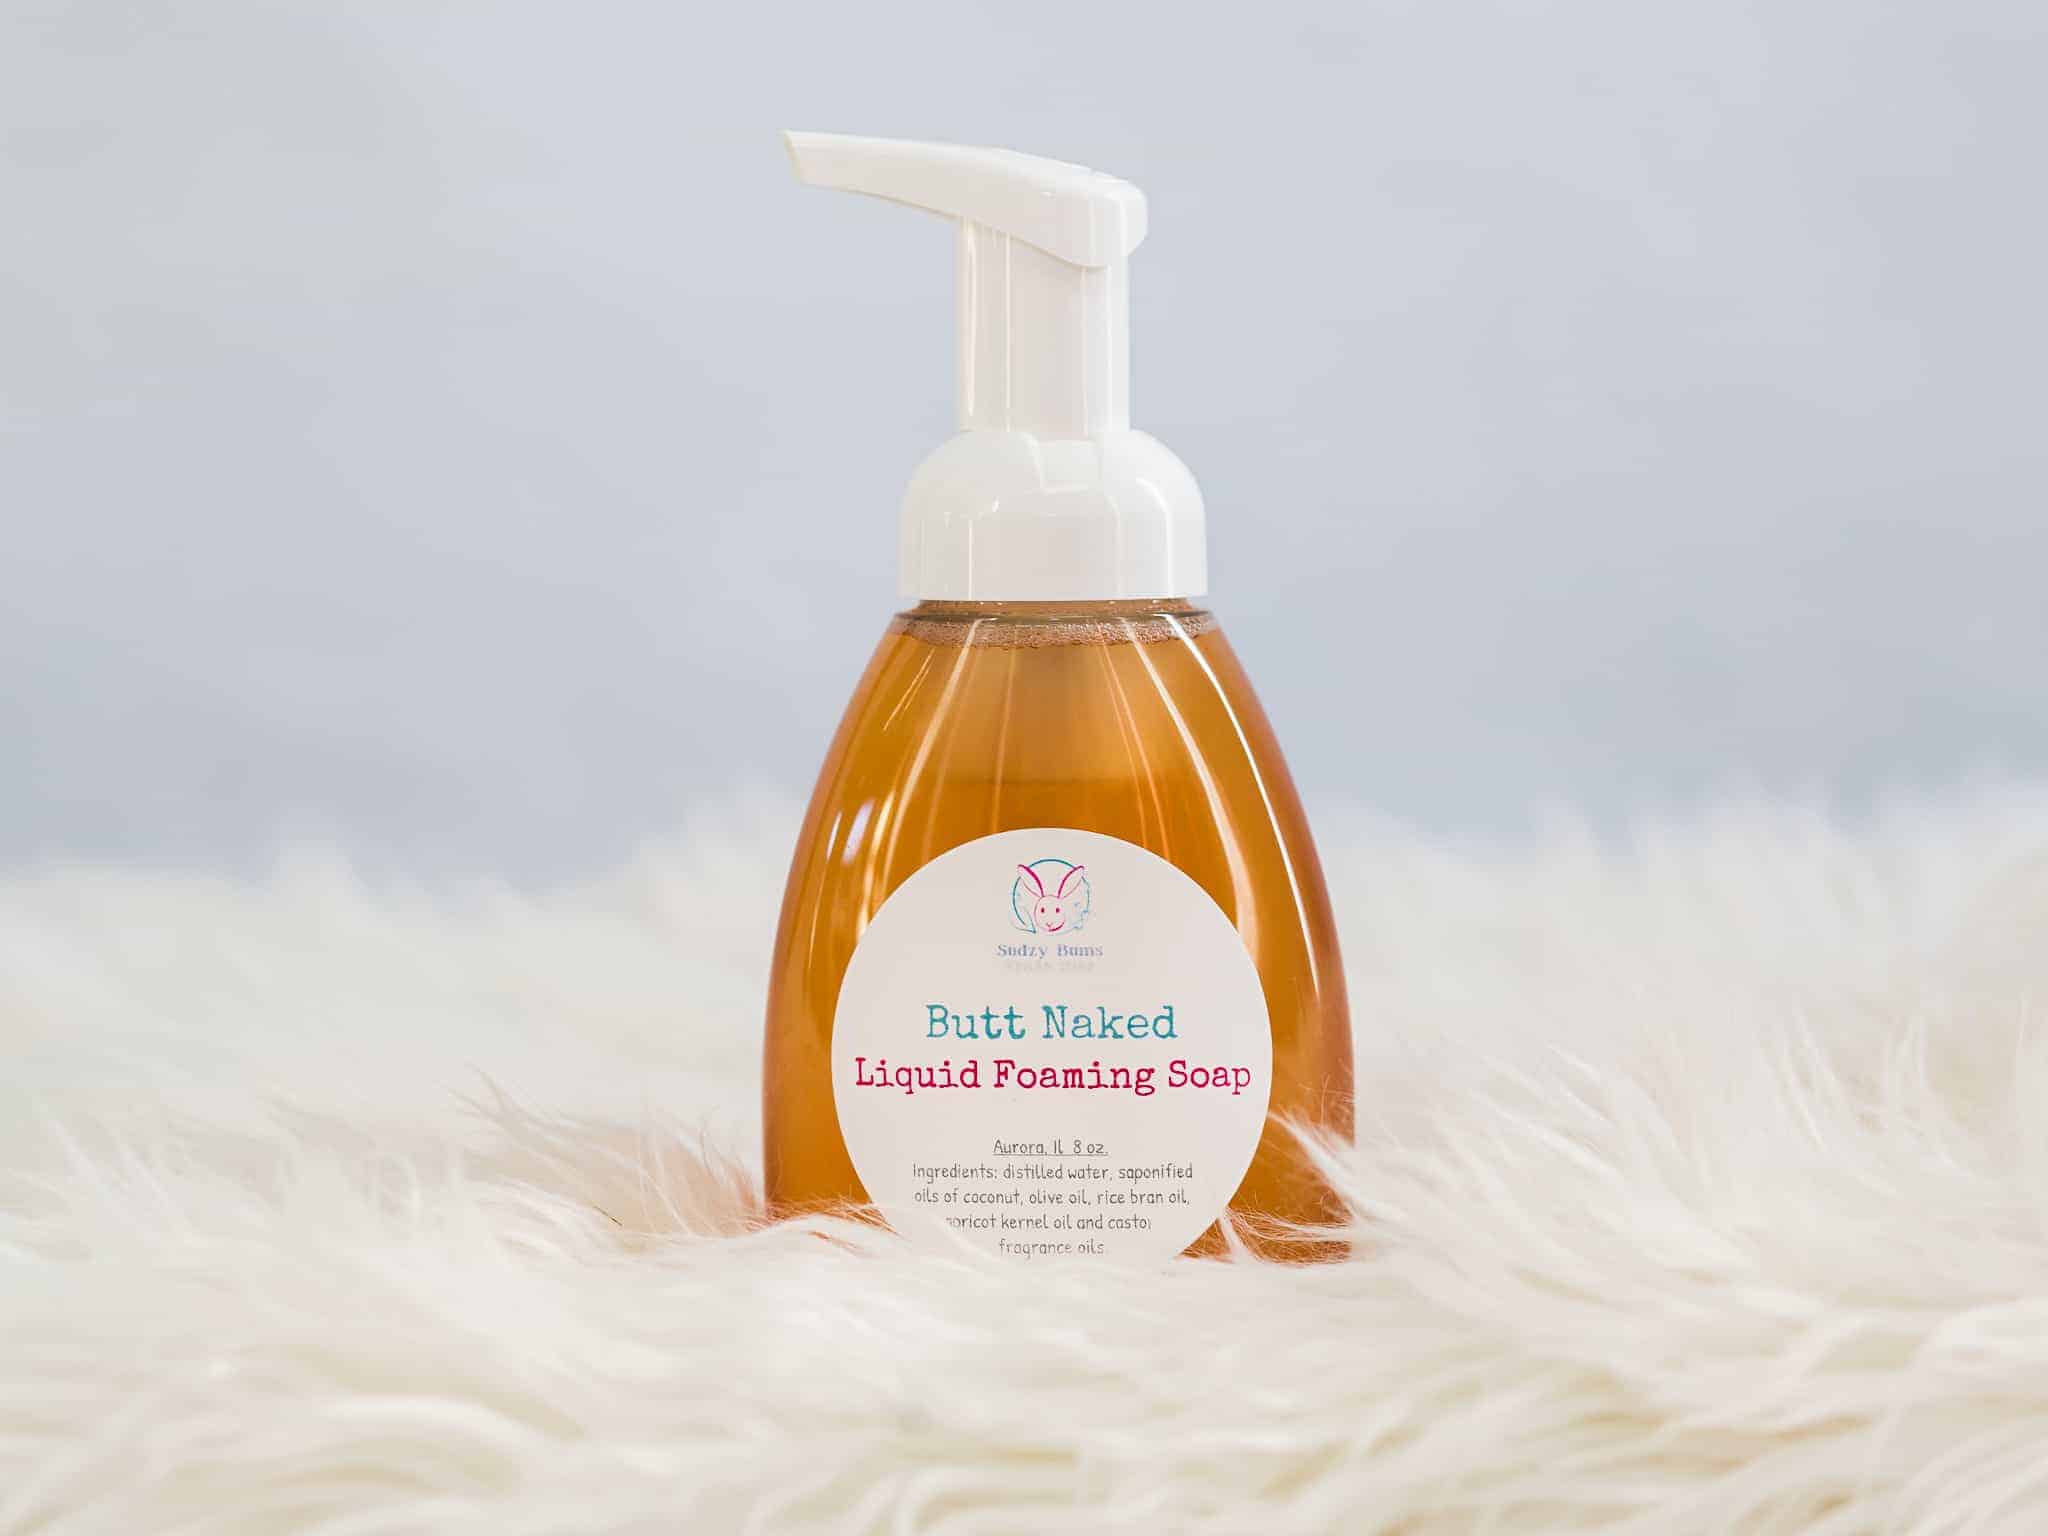 This Butt Naked  Foaming Hand Soap is made with love by Sudzy Bums! Shop more unique gift ideas today with Spots Initiatives, the best way to support creators.